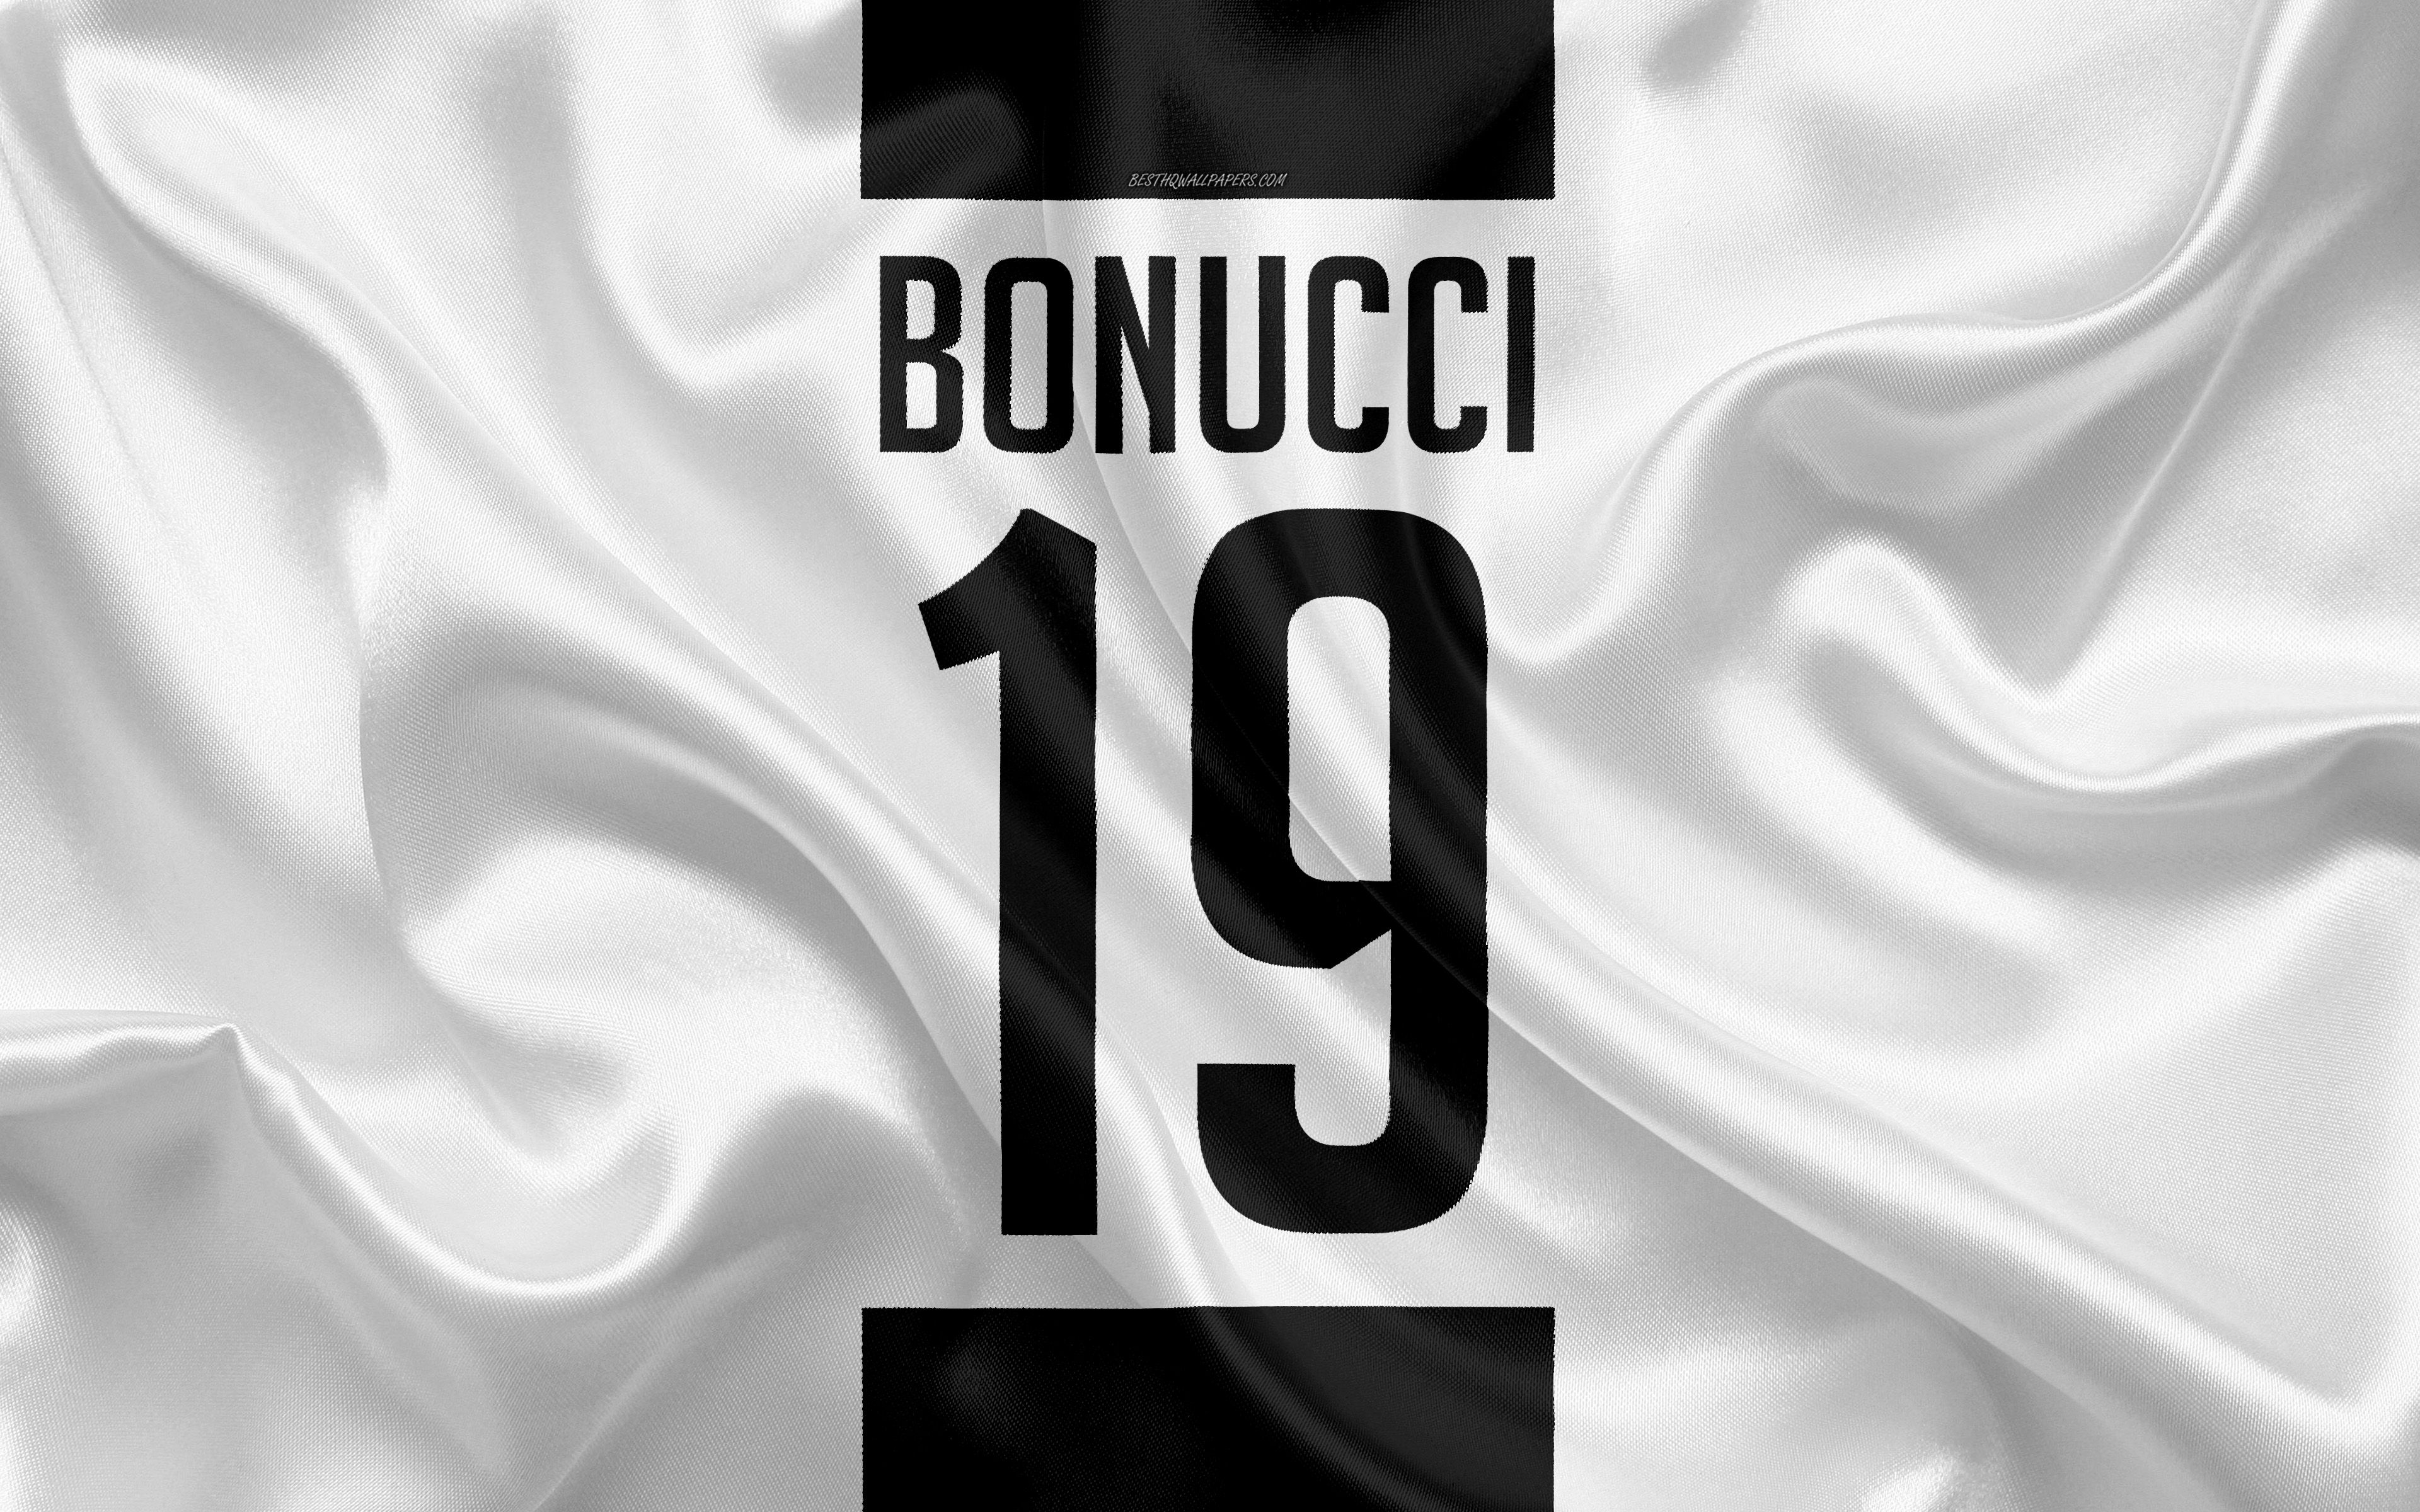 Download Wallpaper Leonardo Bonucci, Juventus FC, T Shirt, 19th Number, Serie A, White Black Silk Texture, Bonucci, Juve, Turin, Italy, Football For Desktop With Resolution 3840x2400. High Quality HD Picture Wallpaper